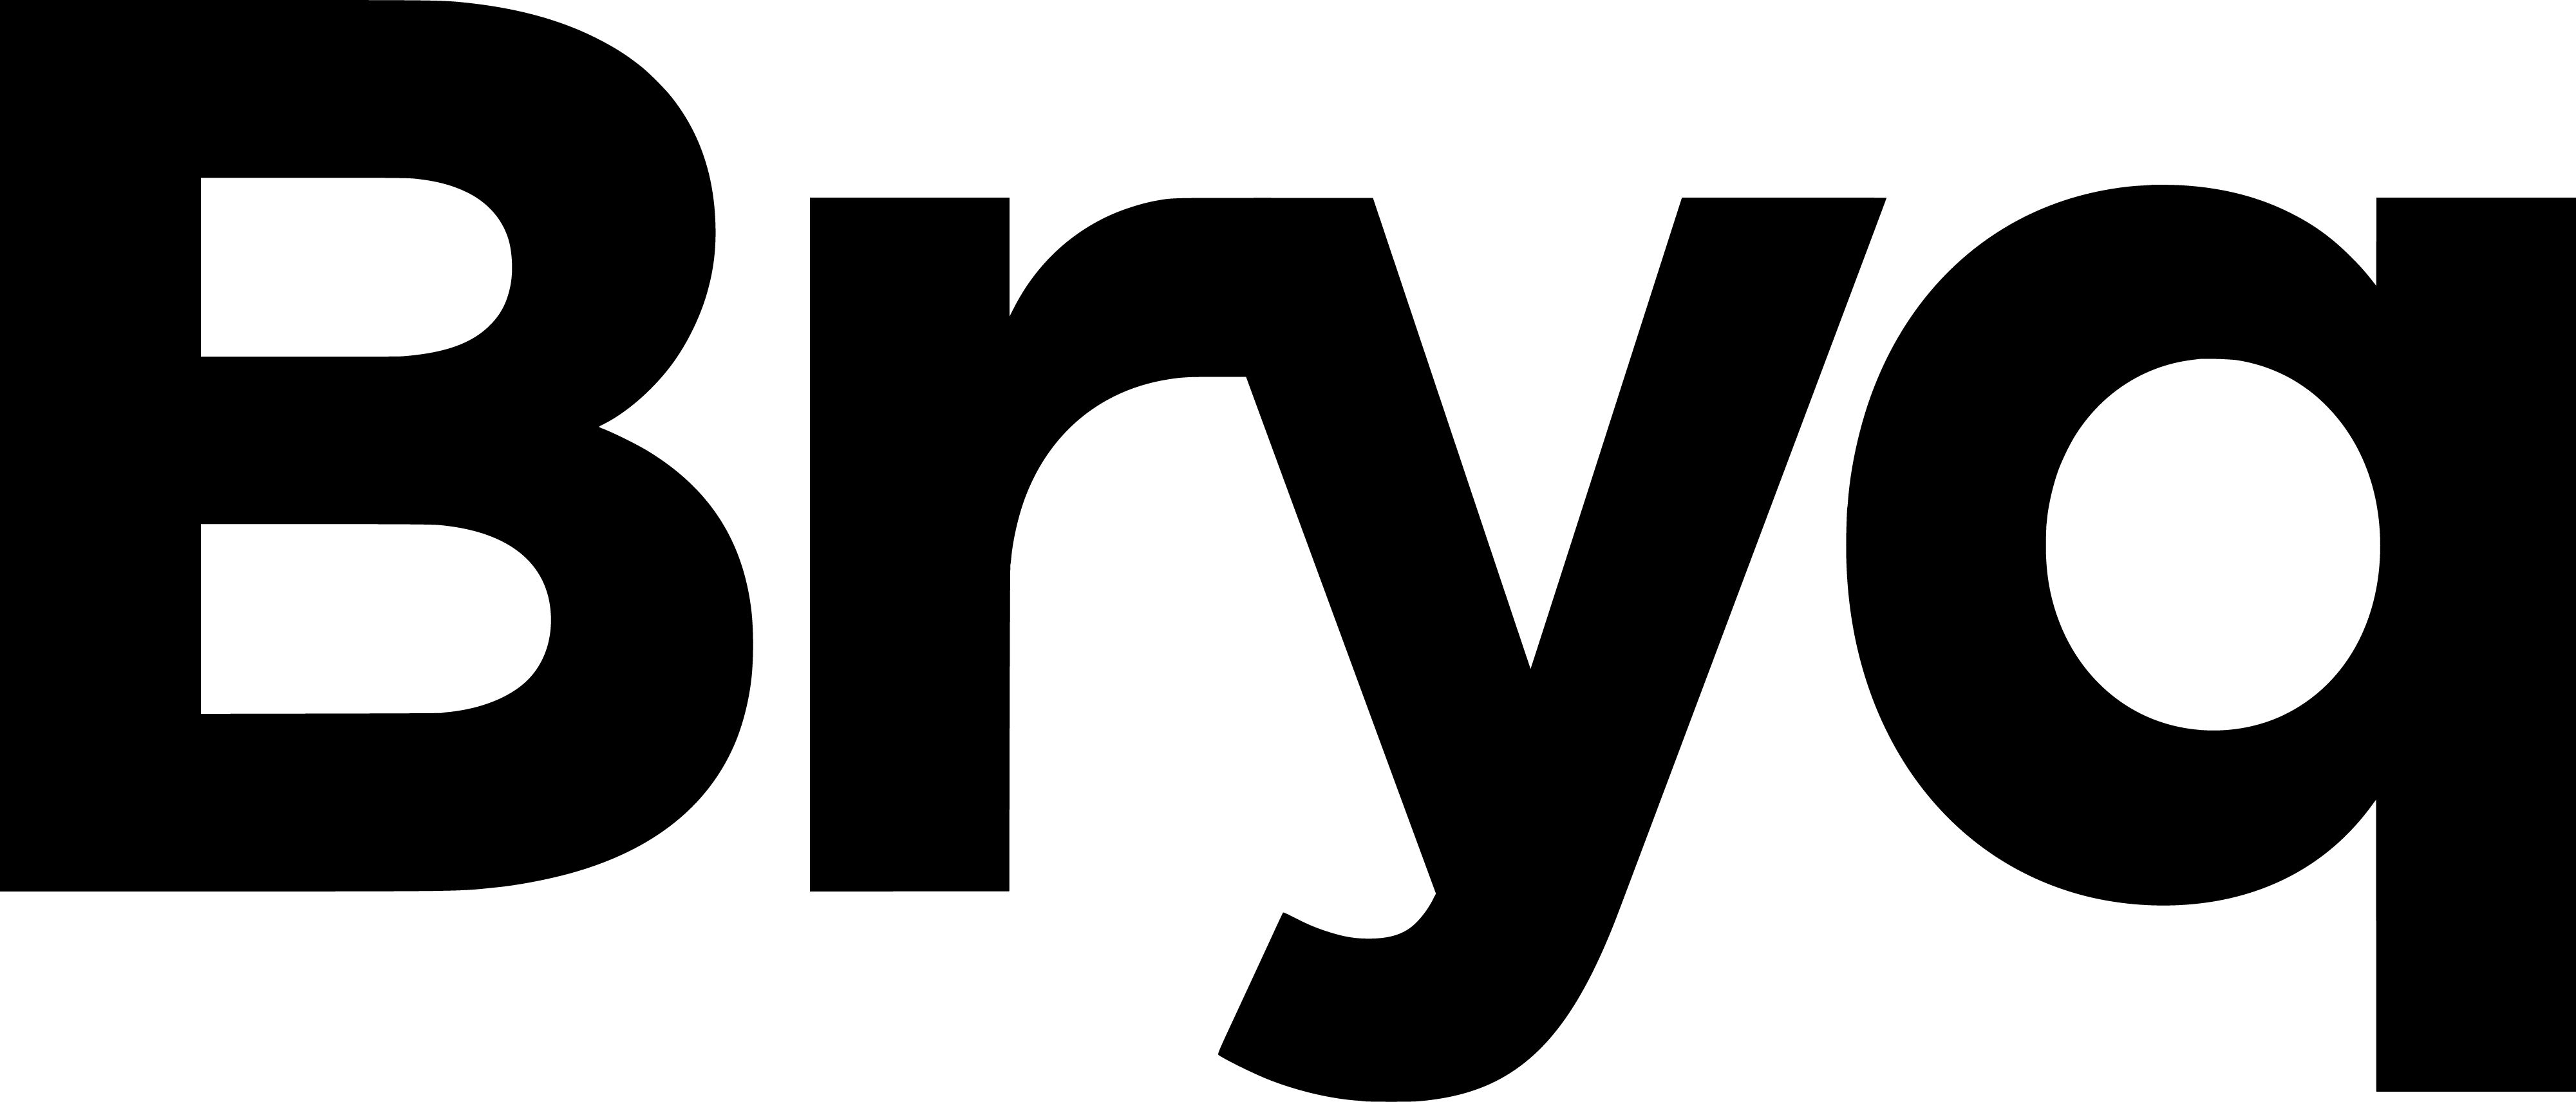 Bryq Pricing, Reviews and Features (February 2021) - SaaSworthy.com